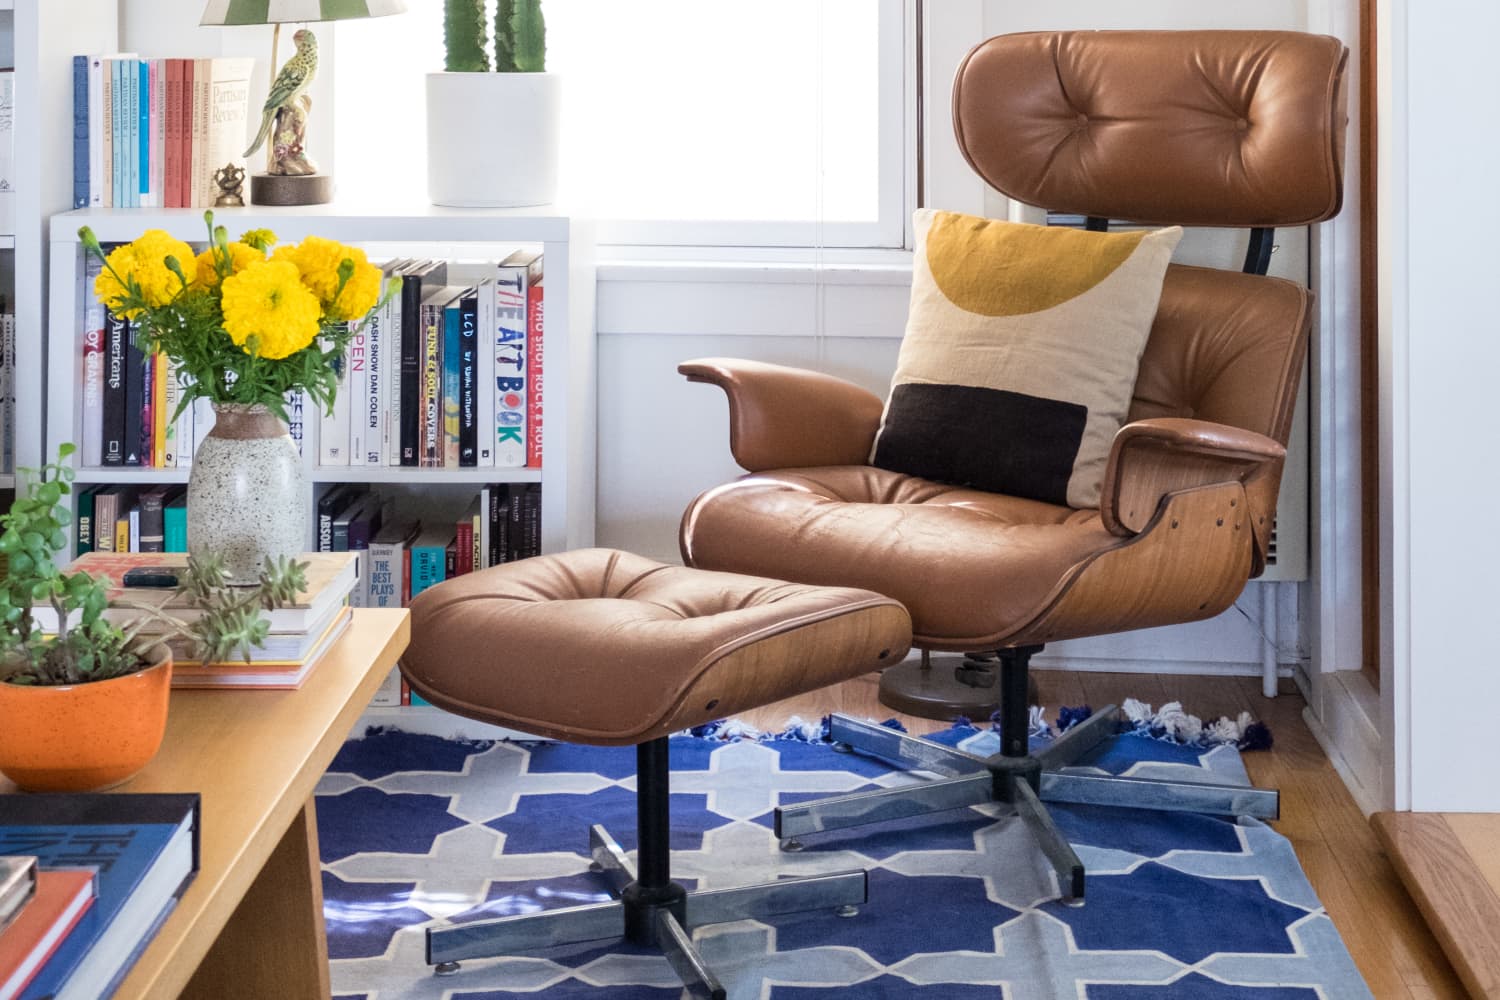 Everything You Need to Know About Faux Leather: Pros, Cons, and How to  Choose, And More